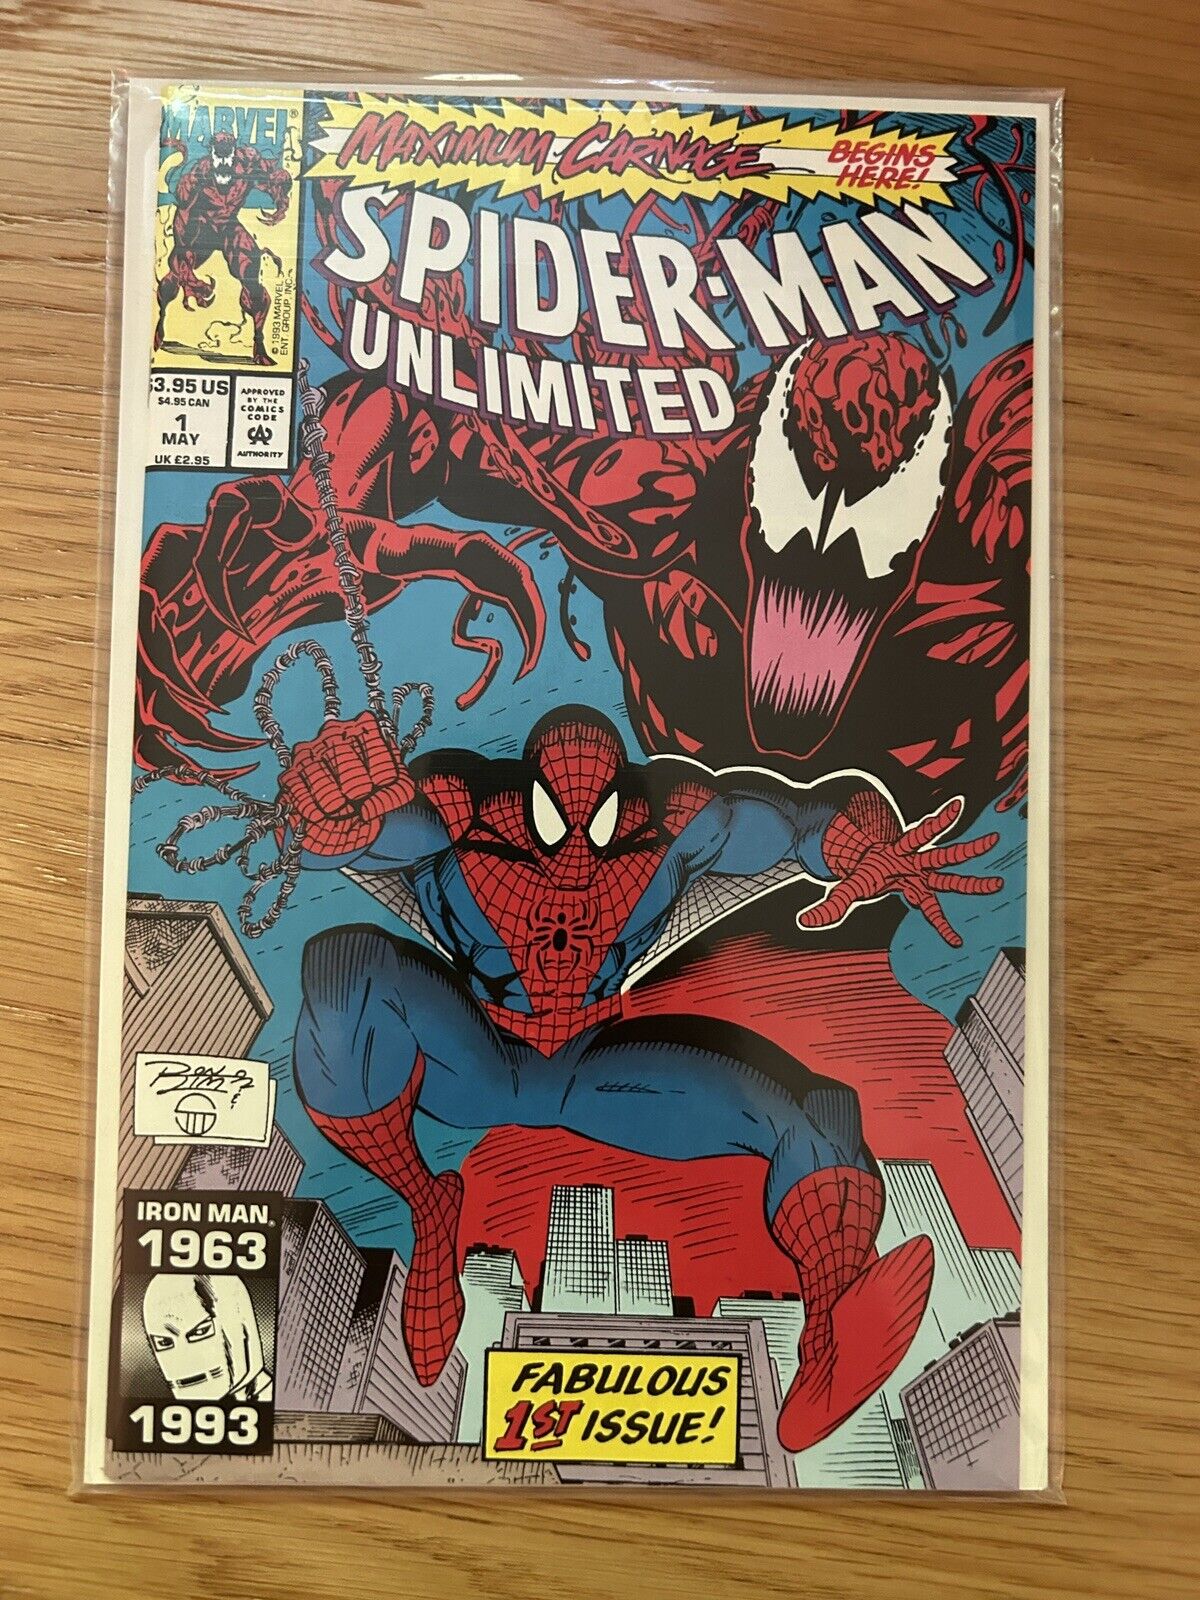 Spider-Man Unlimited #1 Maximum Carnage Begins Here 1st Appearance of Shriek